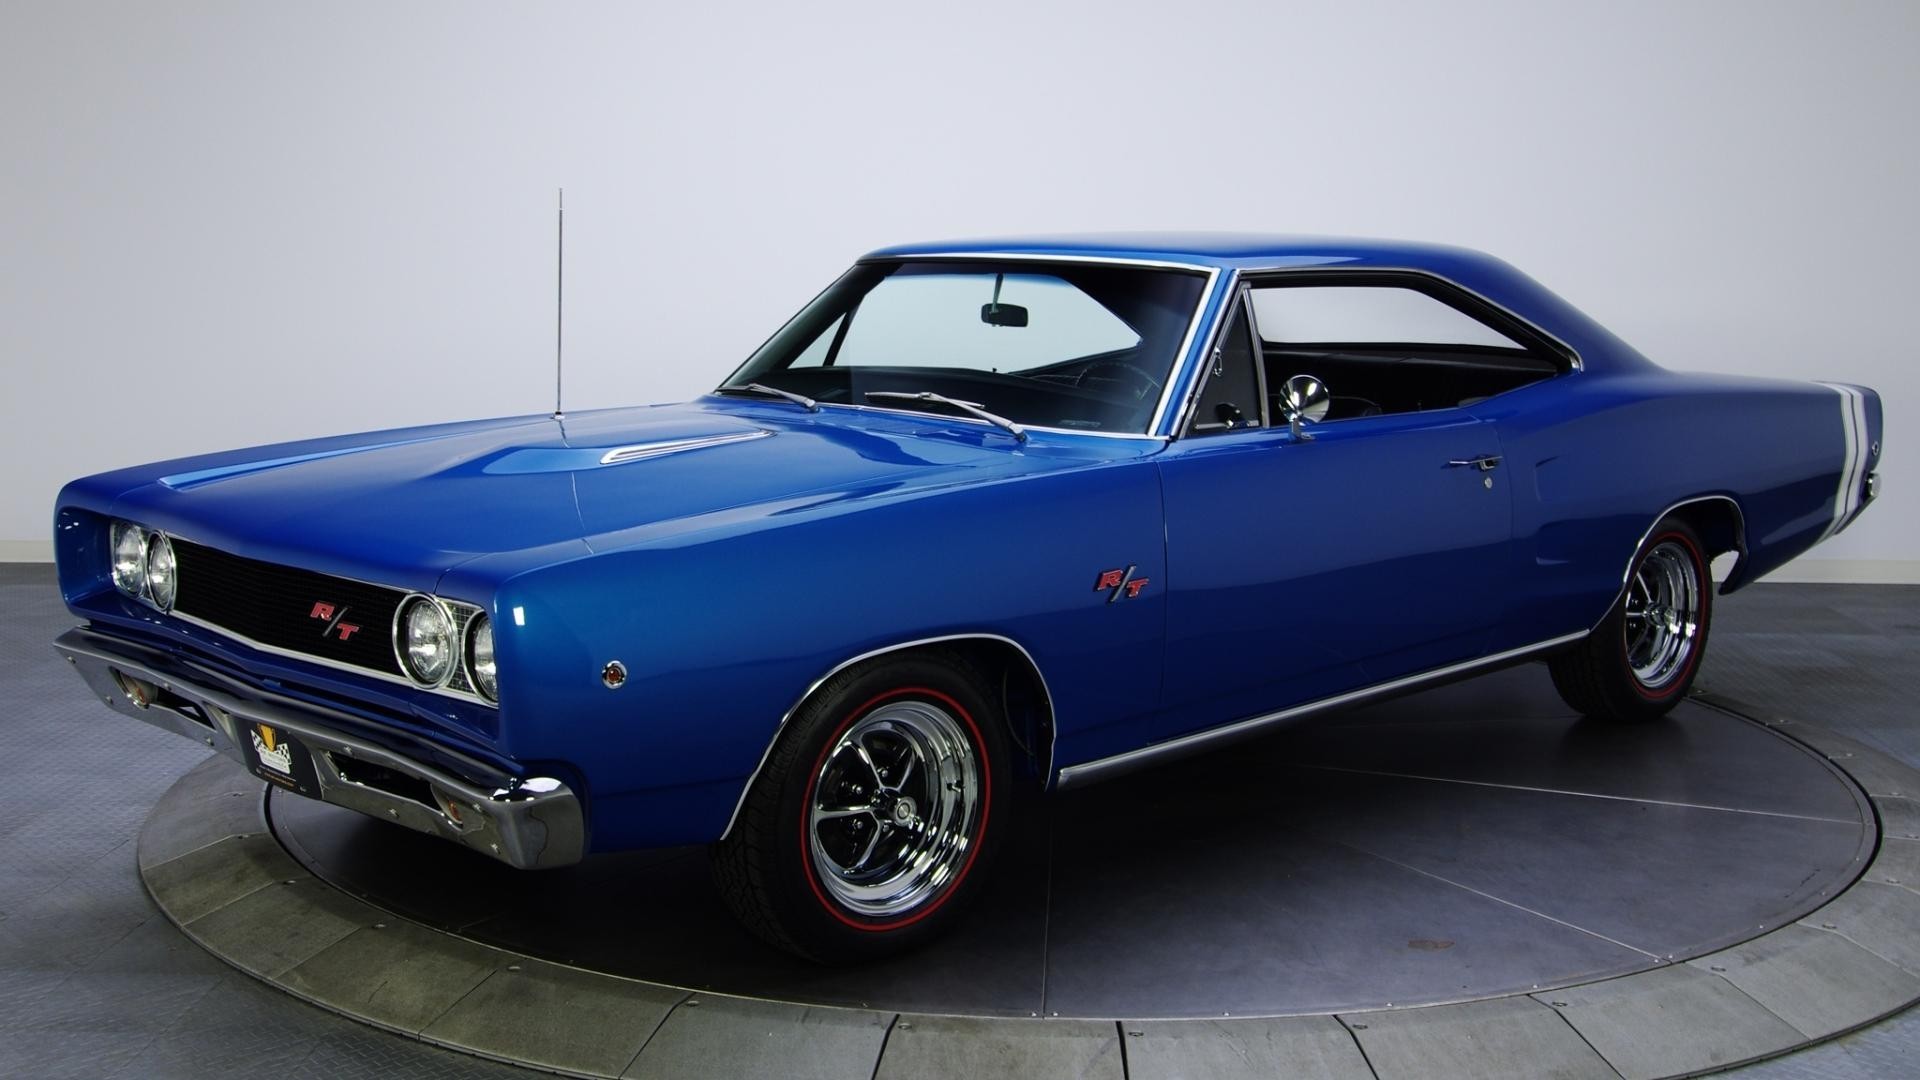 General 1920x1080 car blue cars vehicle Dodge Charger Dodge muscle cars American cars